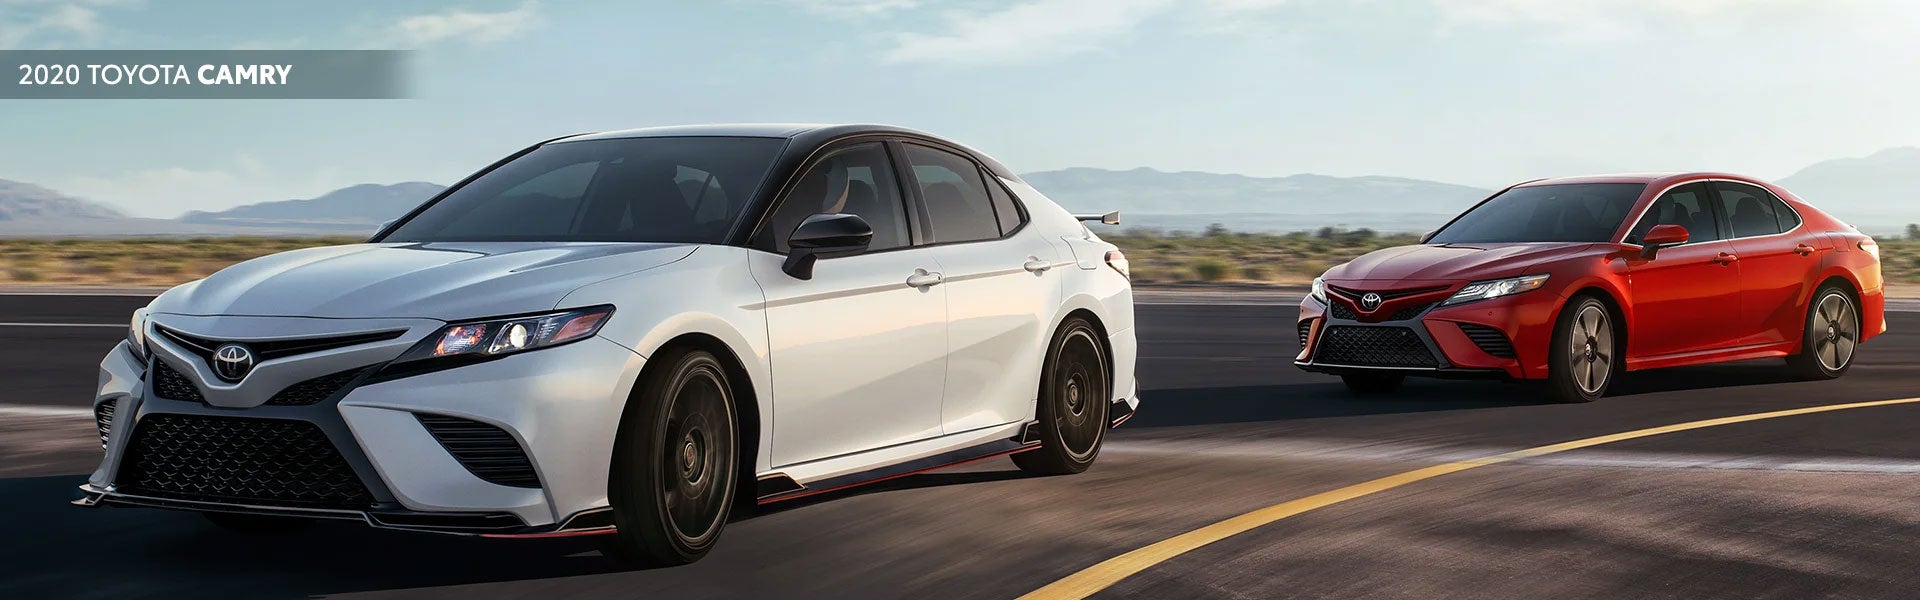 2020 Toyota Camry at Ed Martin Budget Car Sales in Anderson, IN